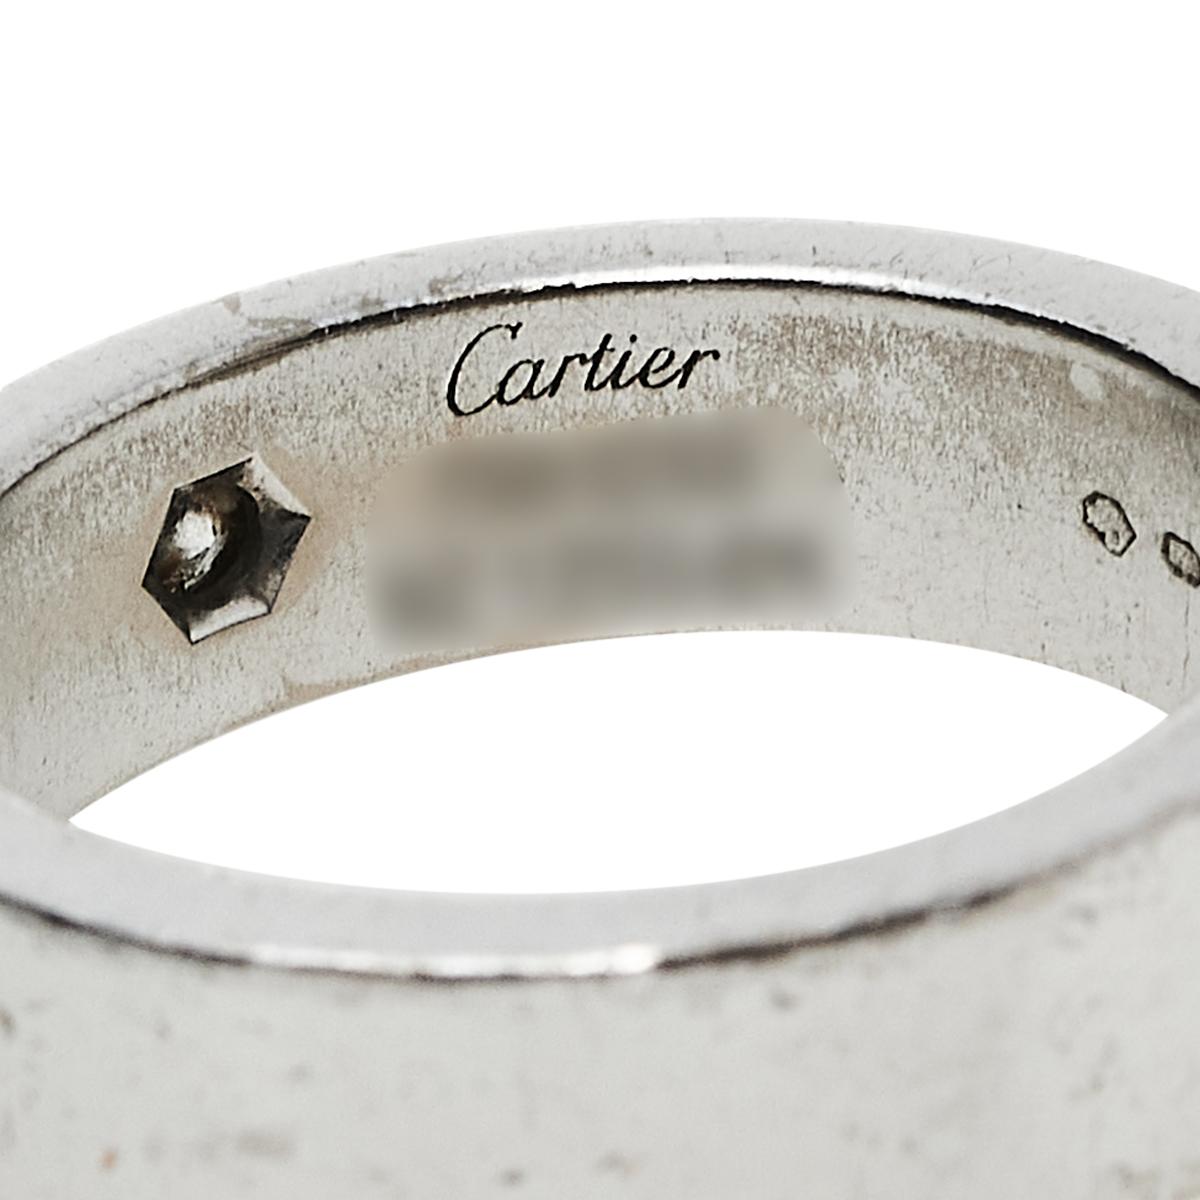 Cartier Love Diamond 18K White Gold Band Ring Size 53 1